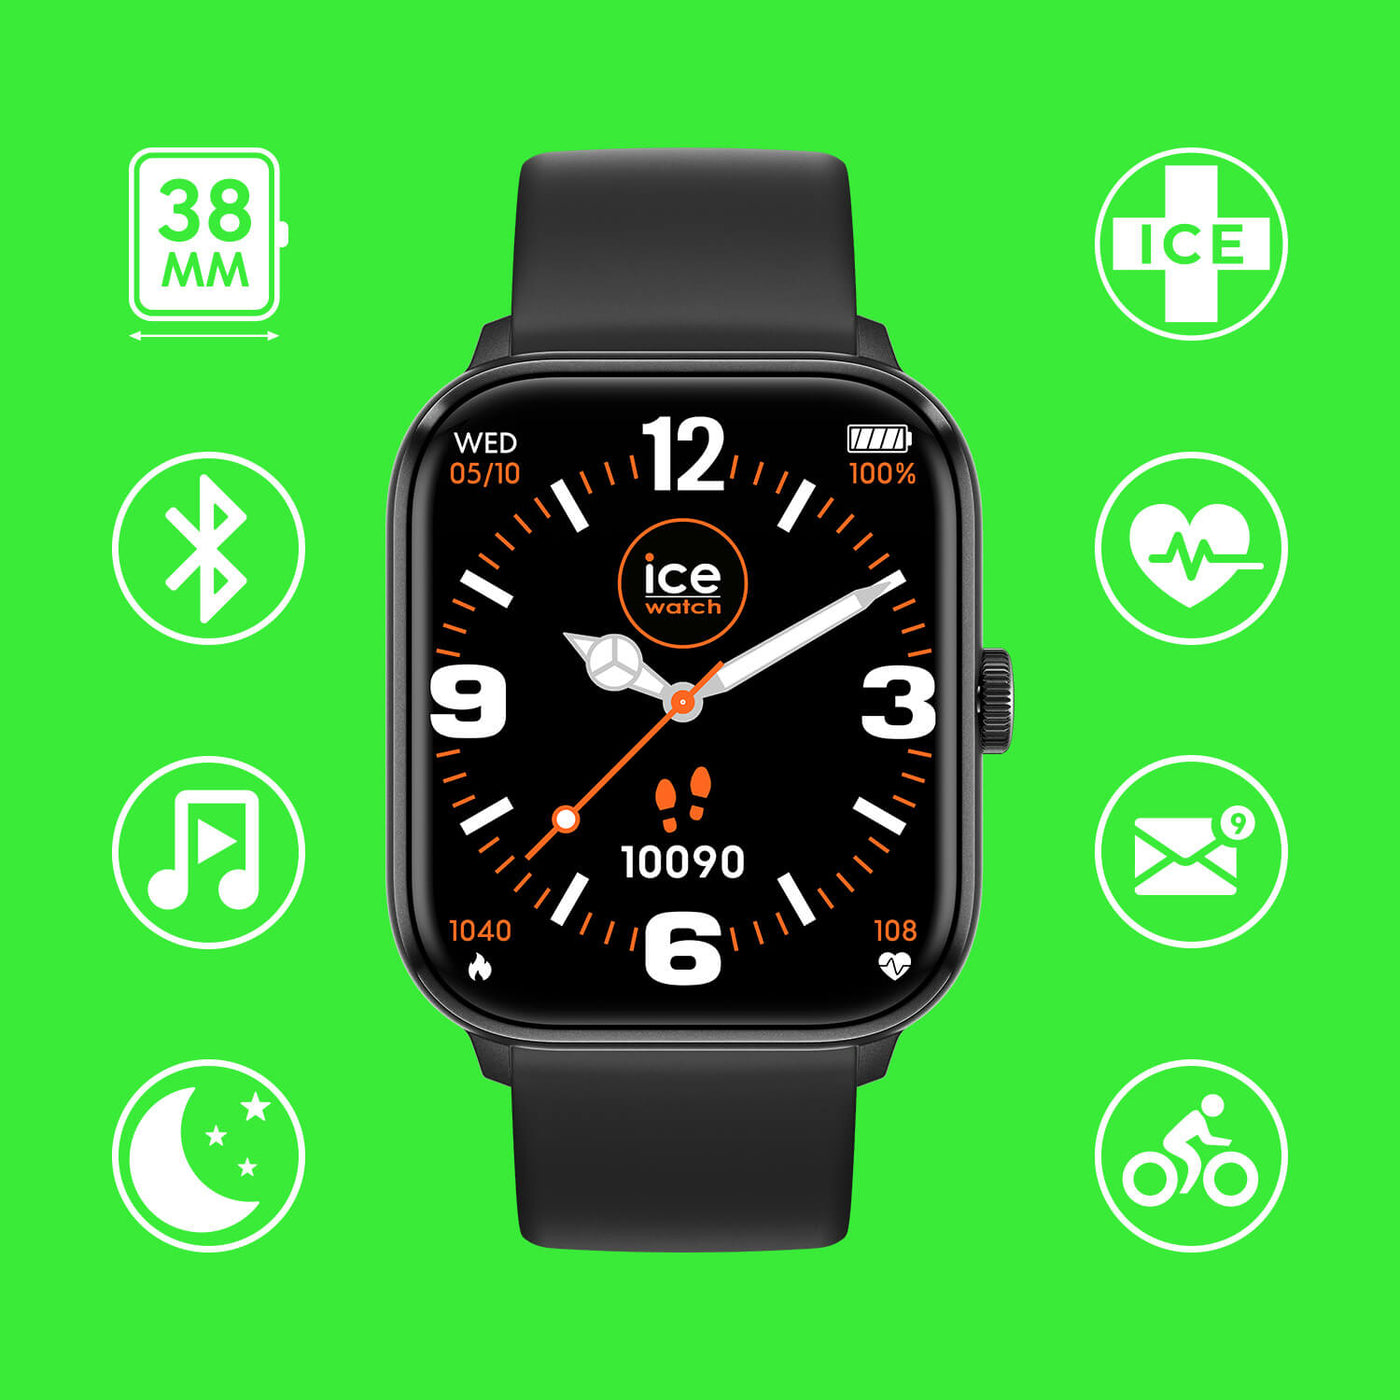 ICE smart one - Connected from your wrist 📲 